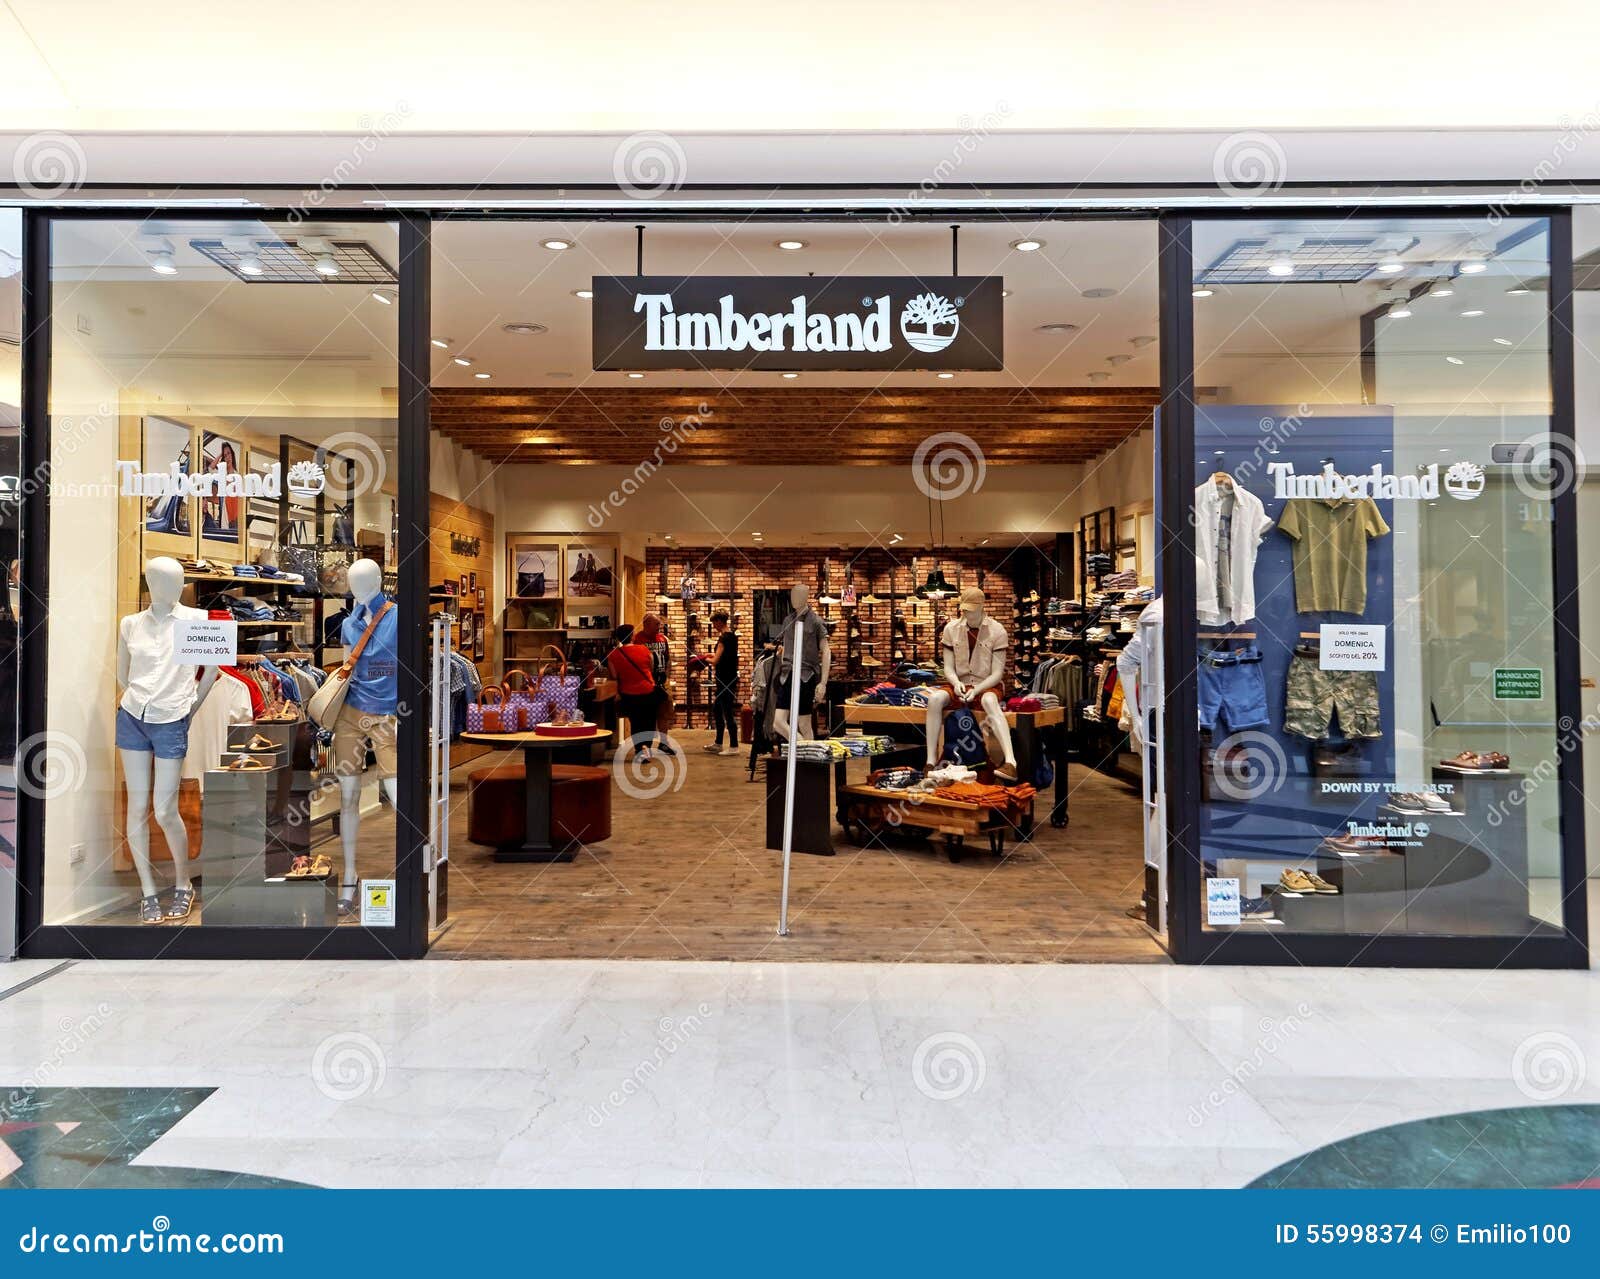 Barricada Por Suburbio Timberland Store In Rome, Italy With People Shopping. Editorial ...